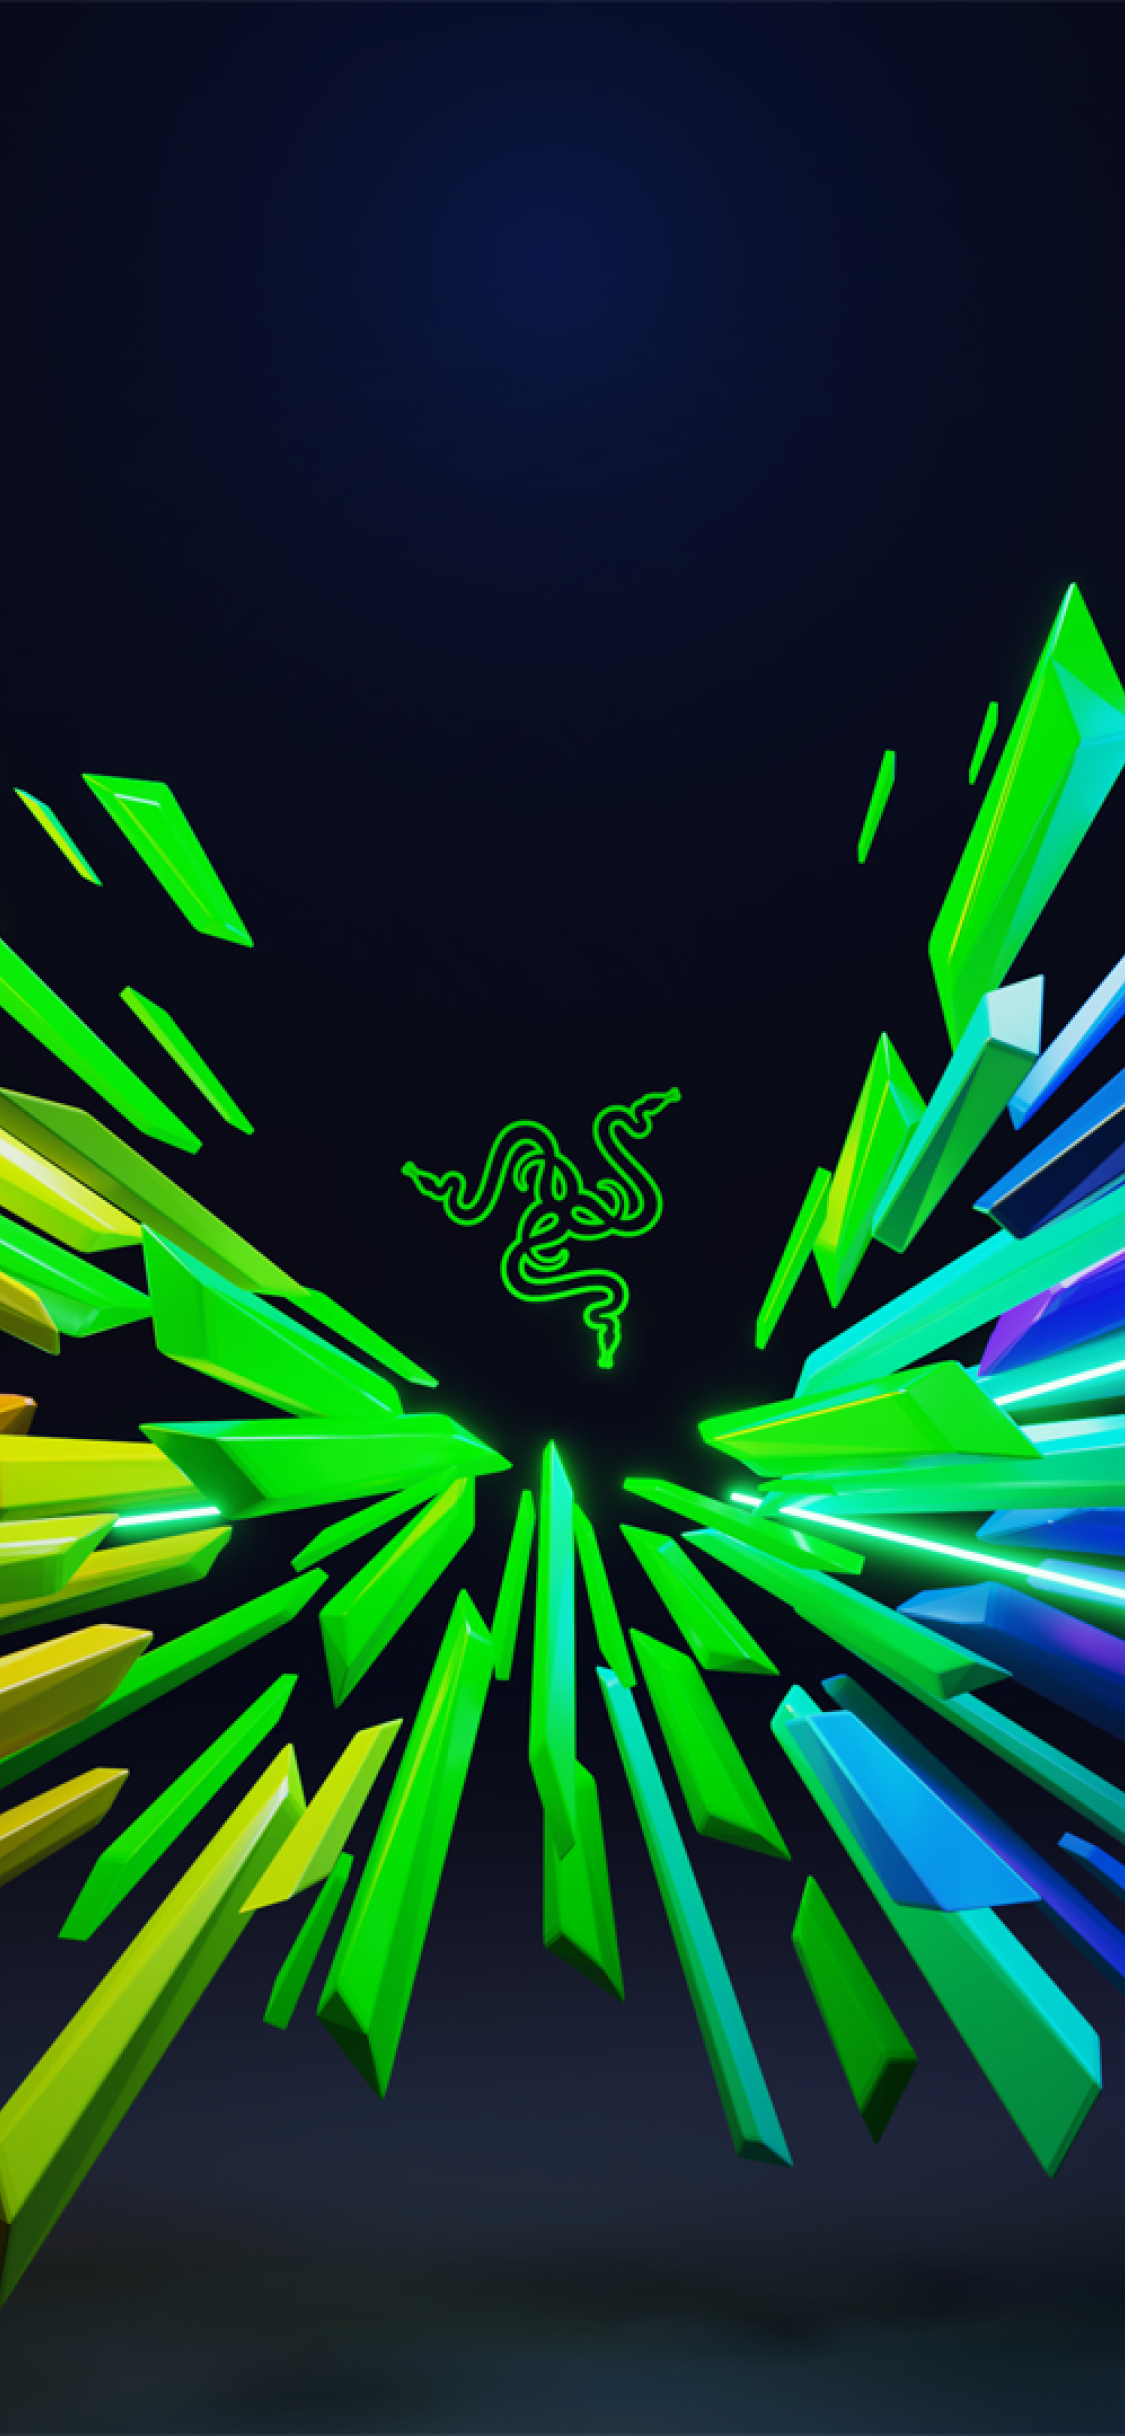 1125x2436 Scatter Razer Iphone Xs Iphone 10 Iphone X Wallpaper Hd Brands 4k Wallpapers Images Photos And Background